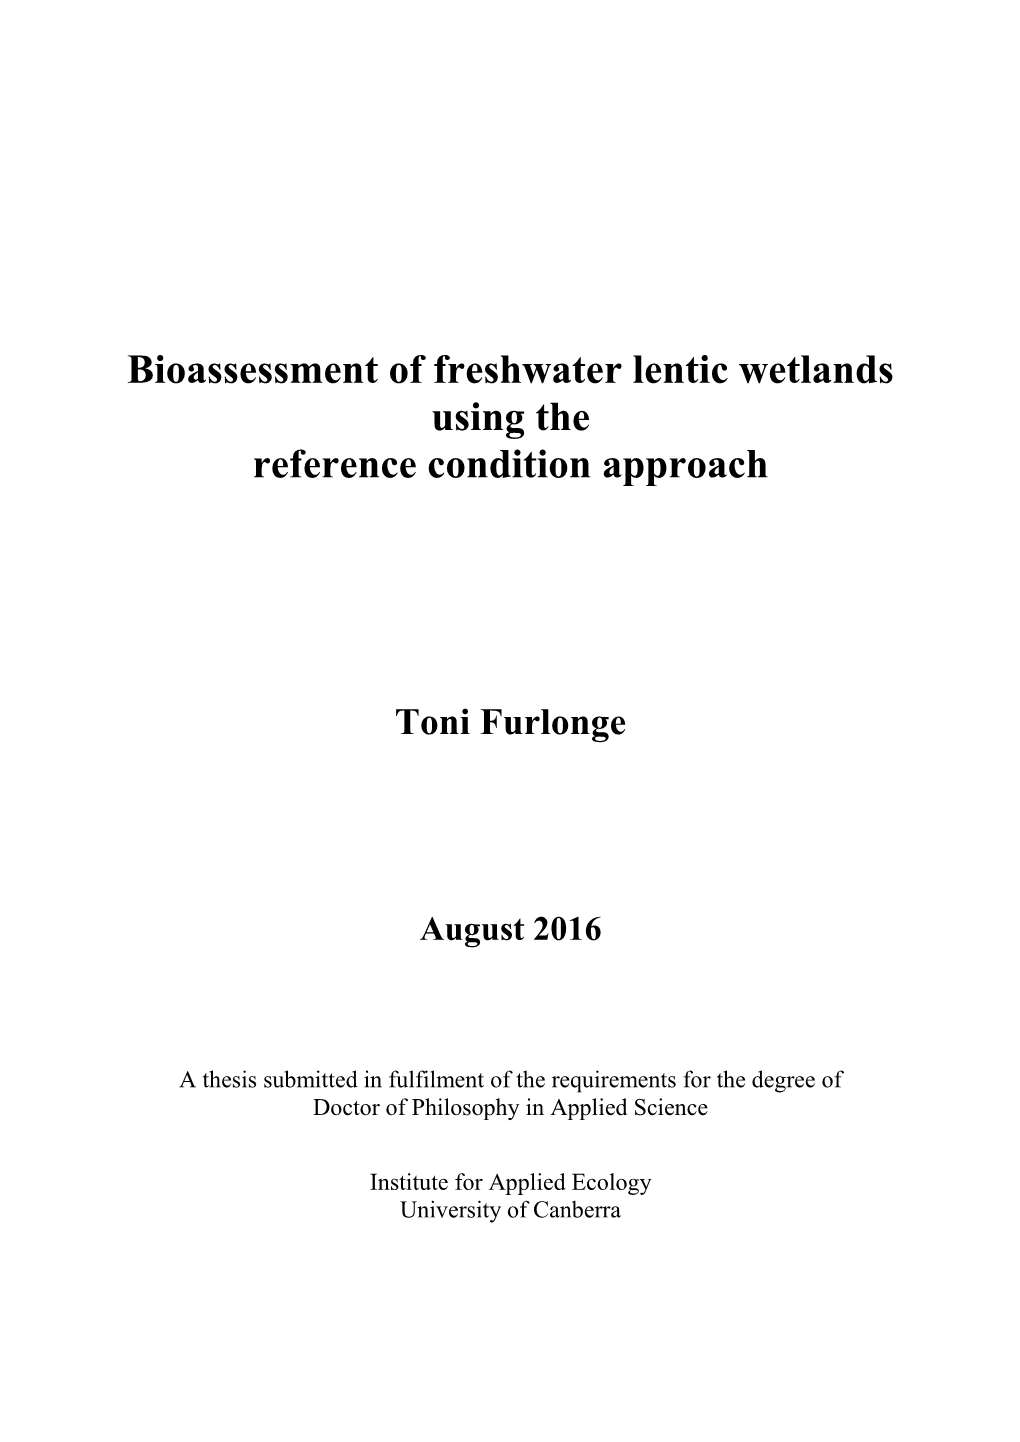 Bioassessment of Freshwater Lentic Wetlands Using the Reference Condition Approach